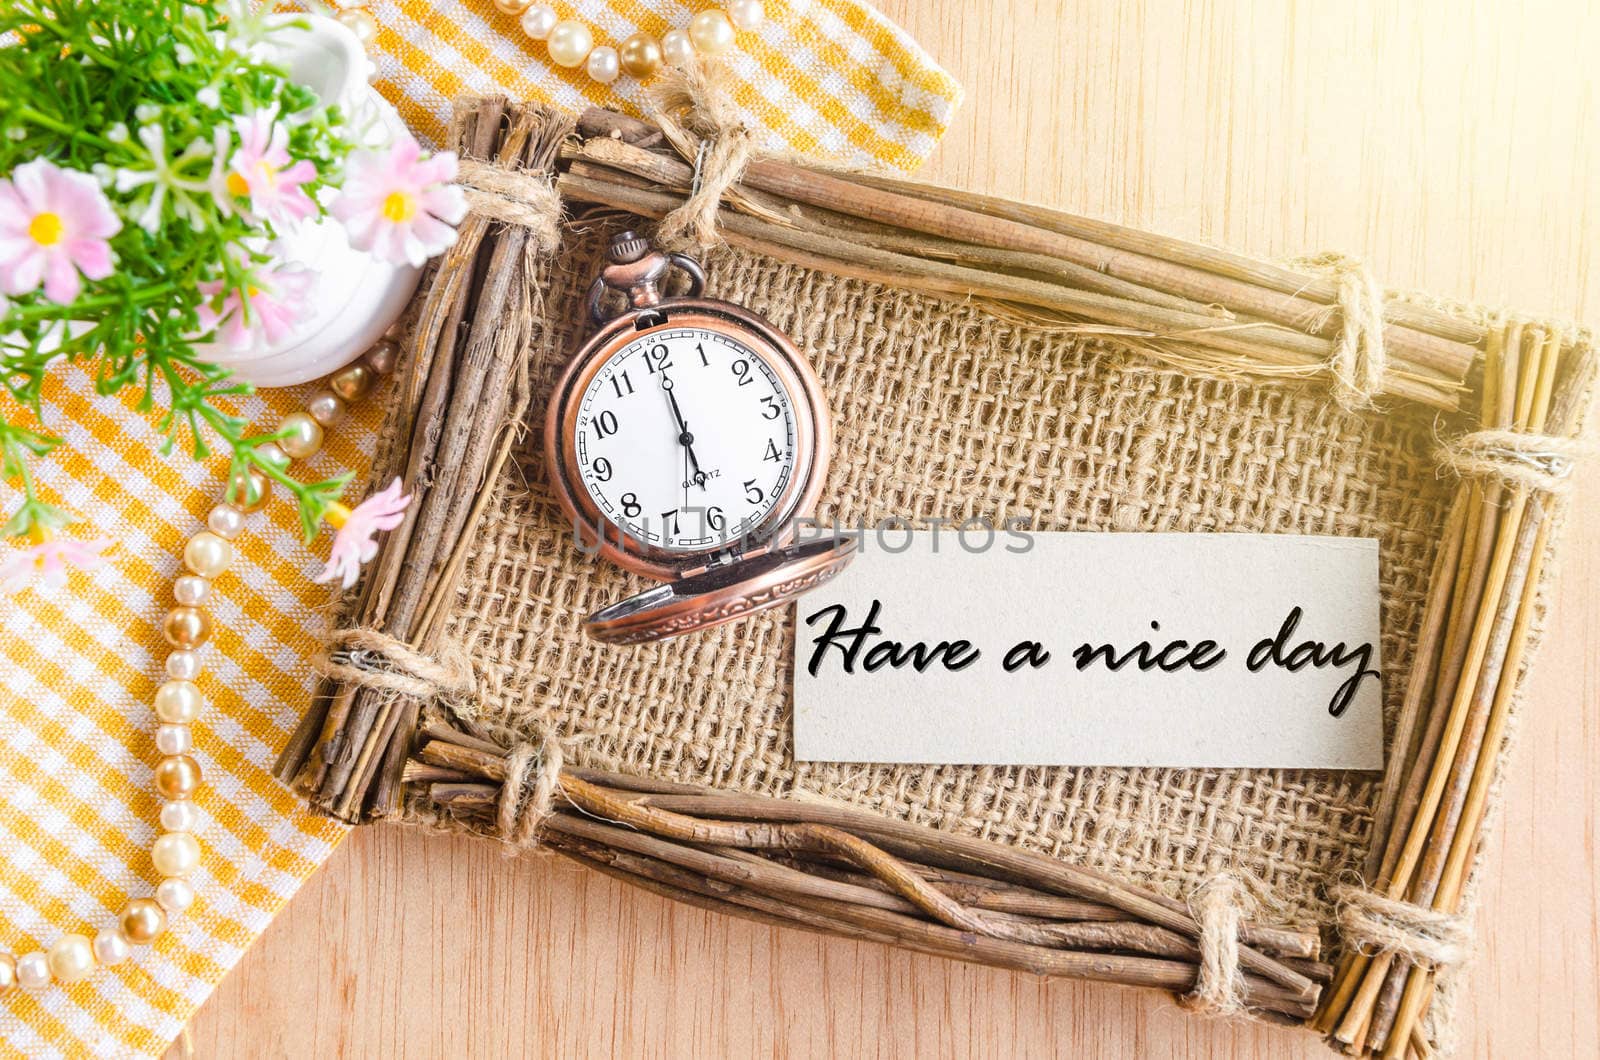 Have a nice day text in sack photo frame with flower on wooden background.